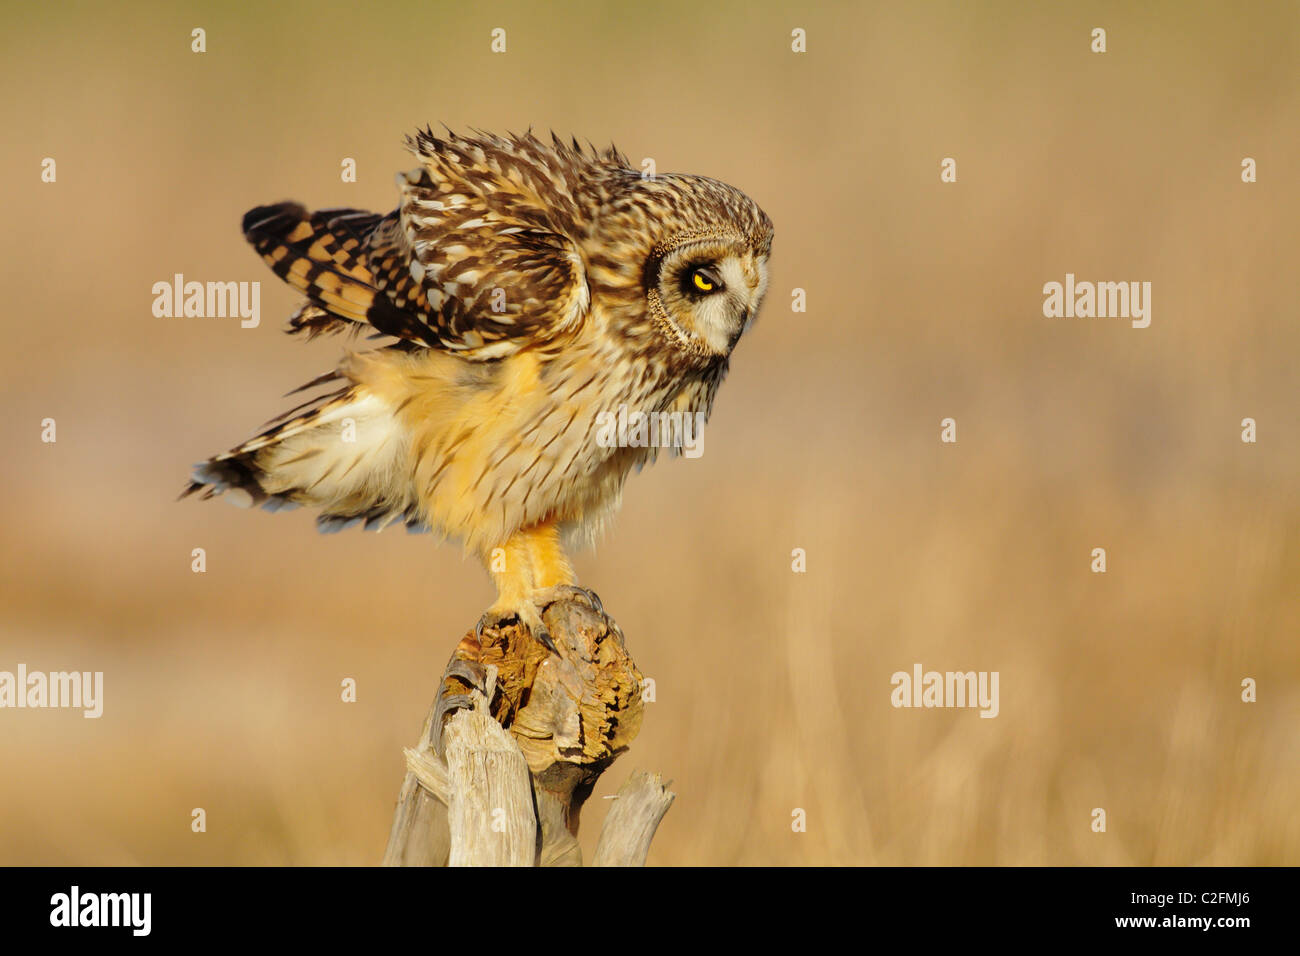 Short eared owl shaking feathers on stump in salt marsh-Boundary Bay, Vancouver, British Columbia, Canada. Stock Photo